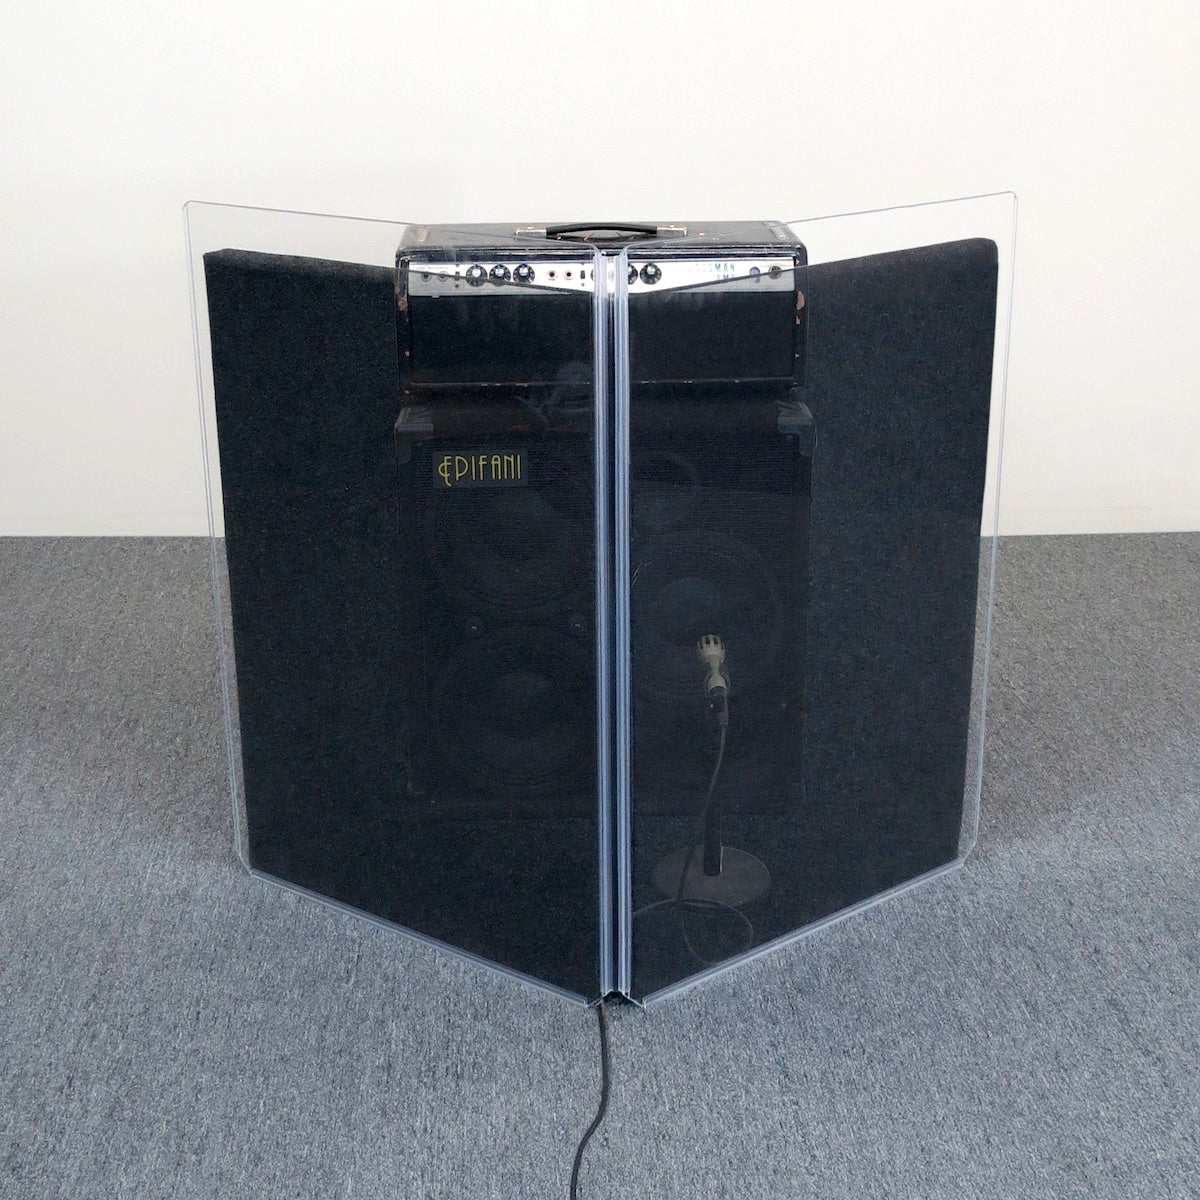 ClearSonic GP40 - GoboPac 40 - Studio Sound Isolation System, shown with transparent amp